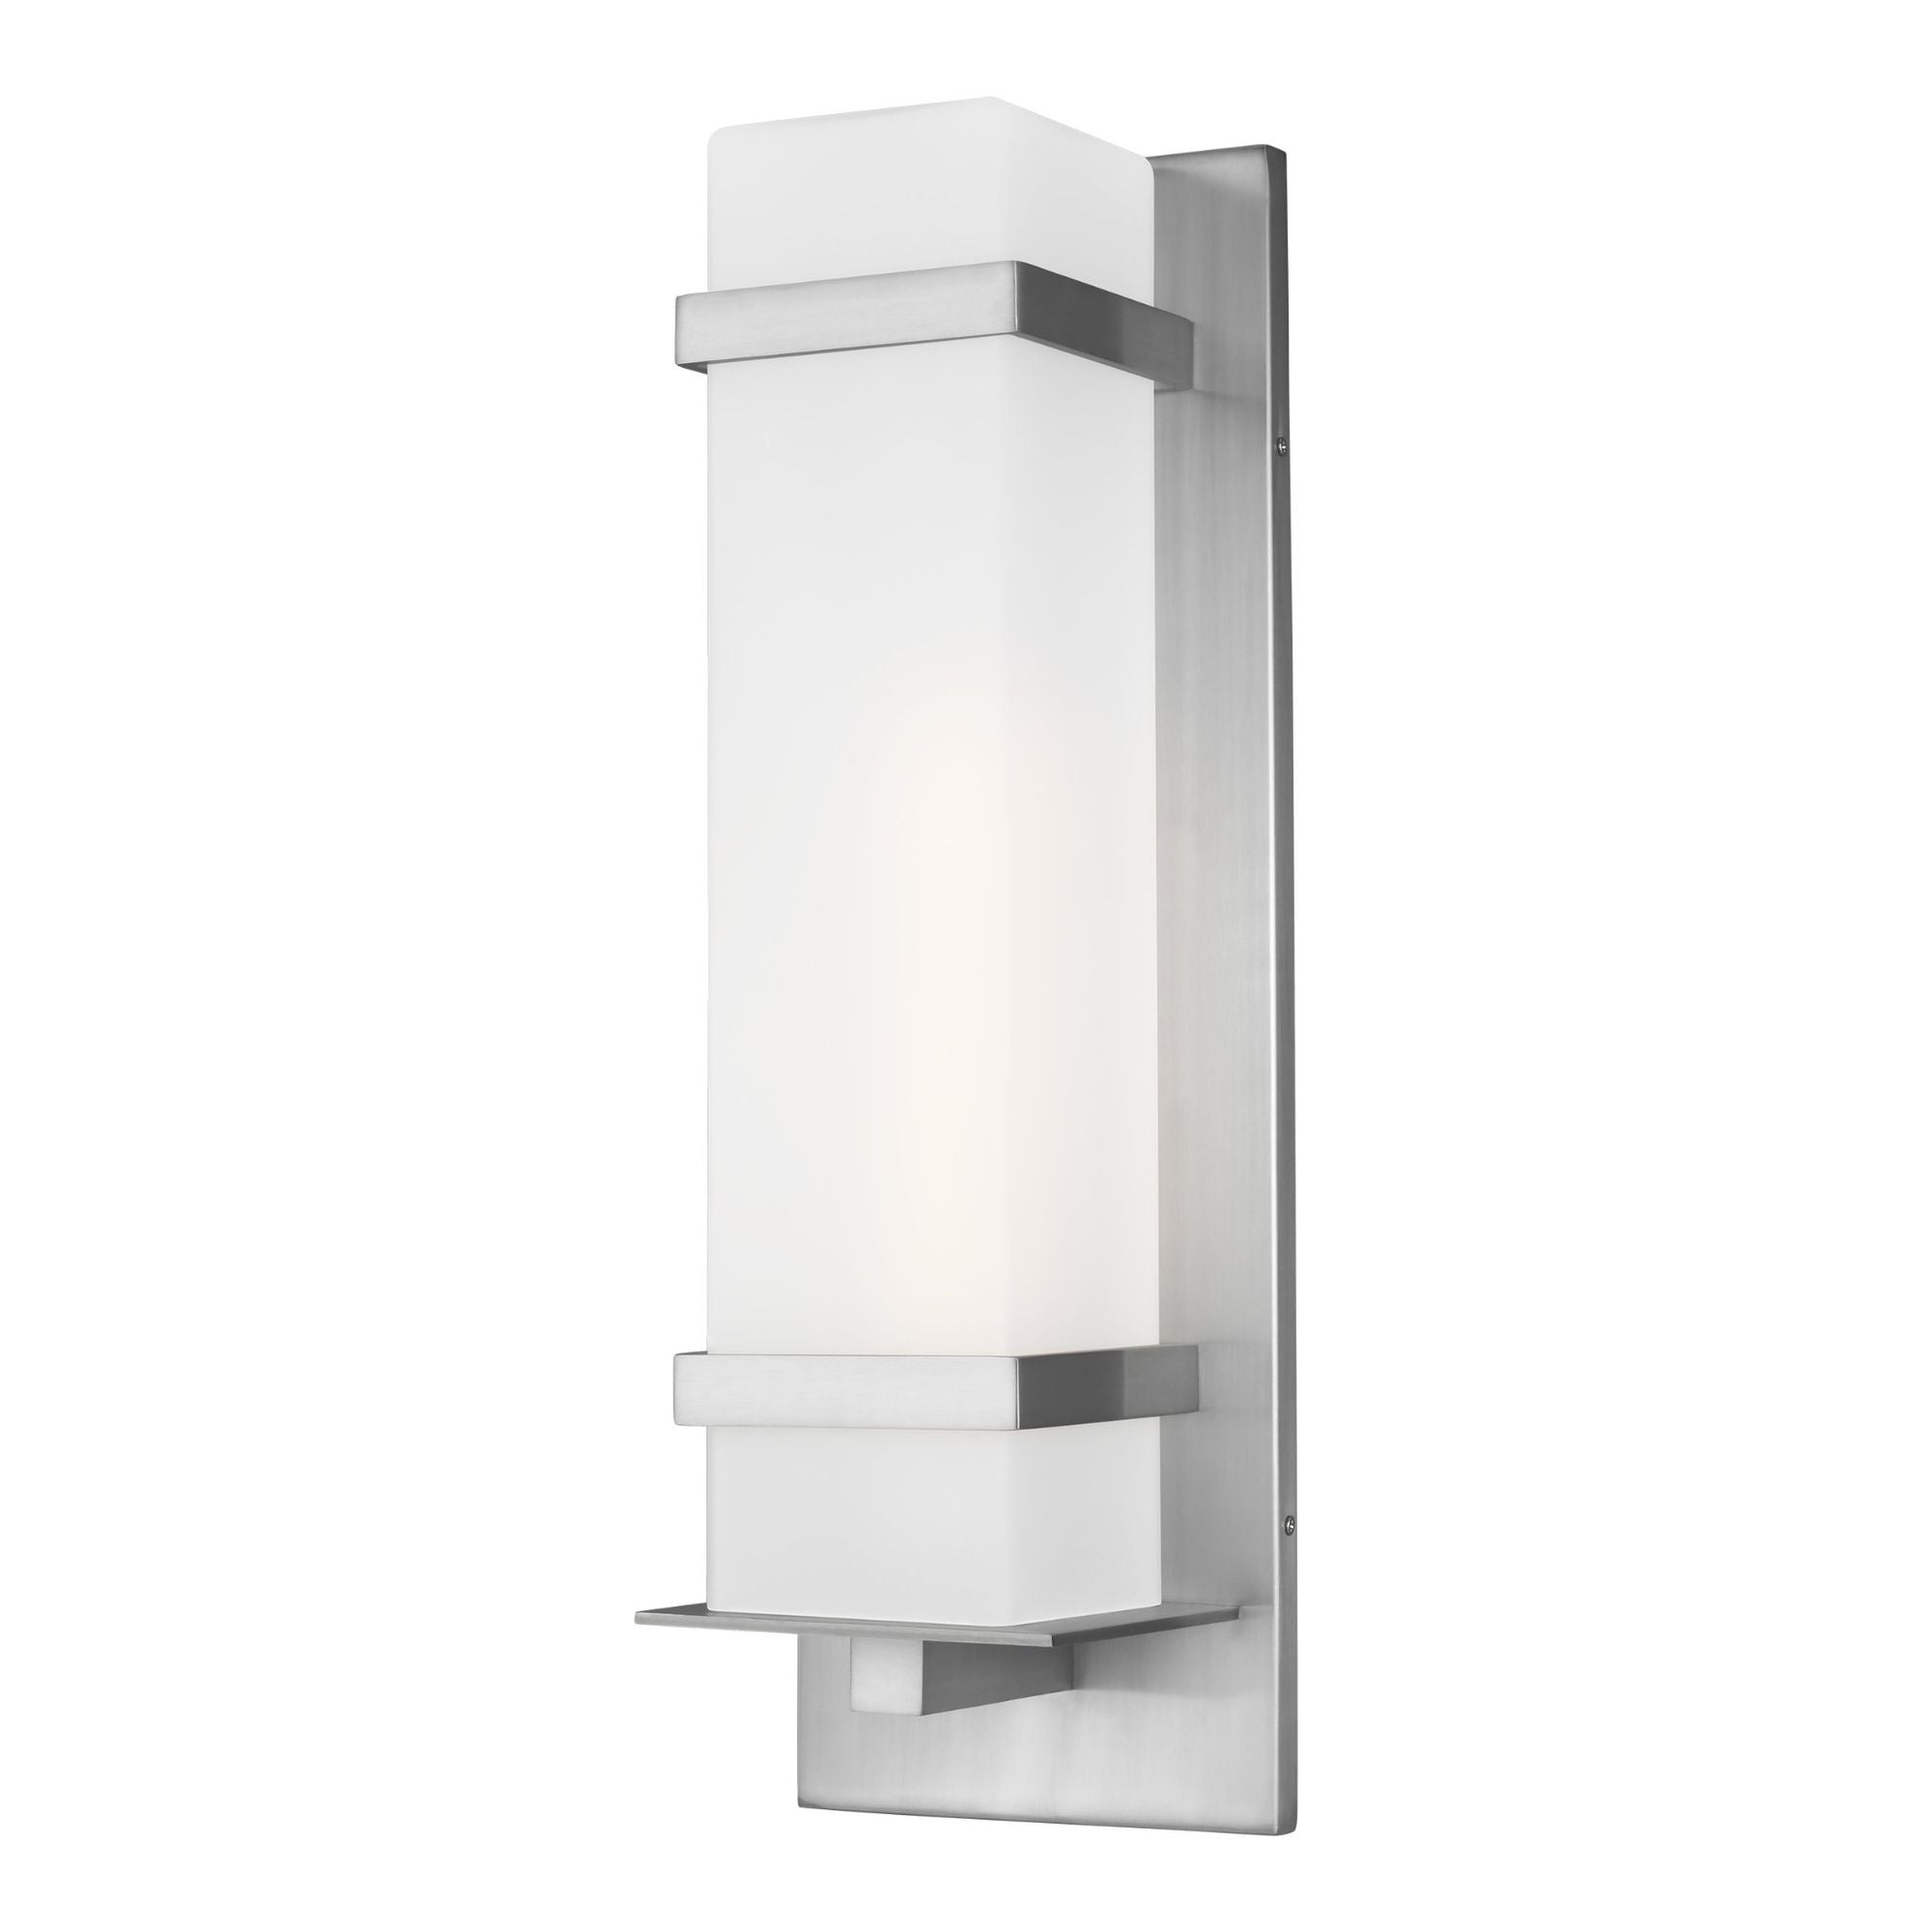 Alban Large One Light Outdoor Wall Lantern LED Modern Fixture 8" Width 24.625" Height Aluminum Square Etched Opal Shade in Satin